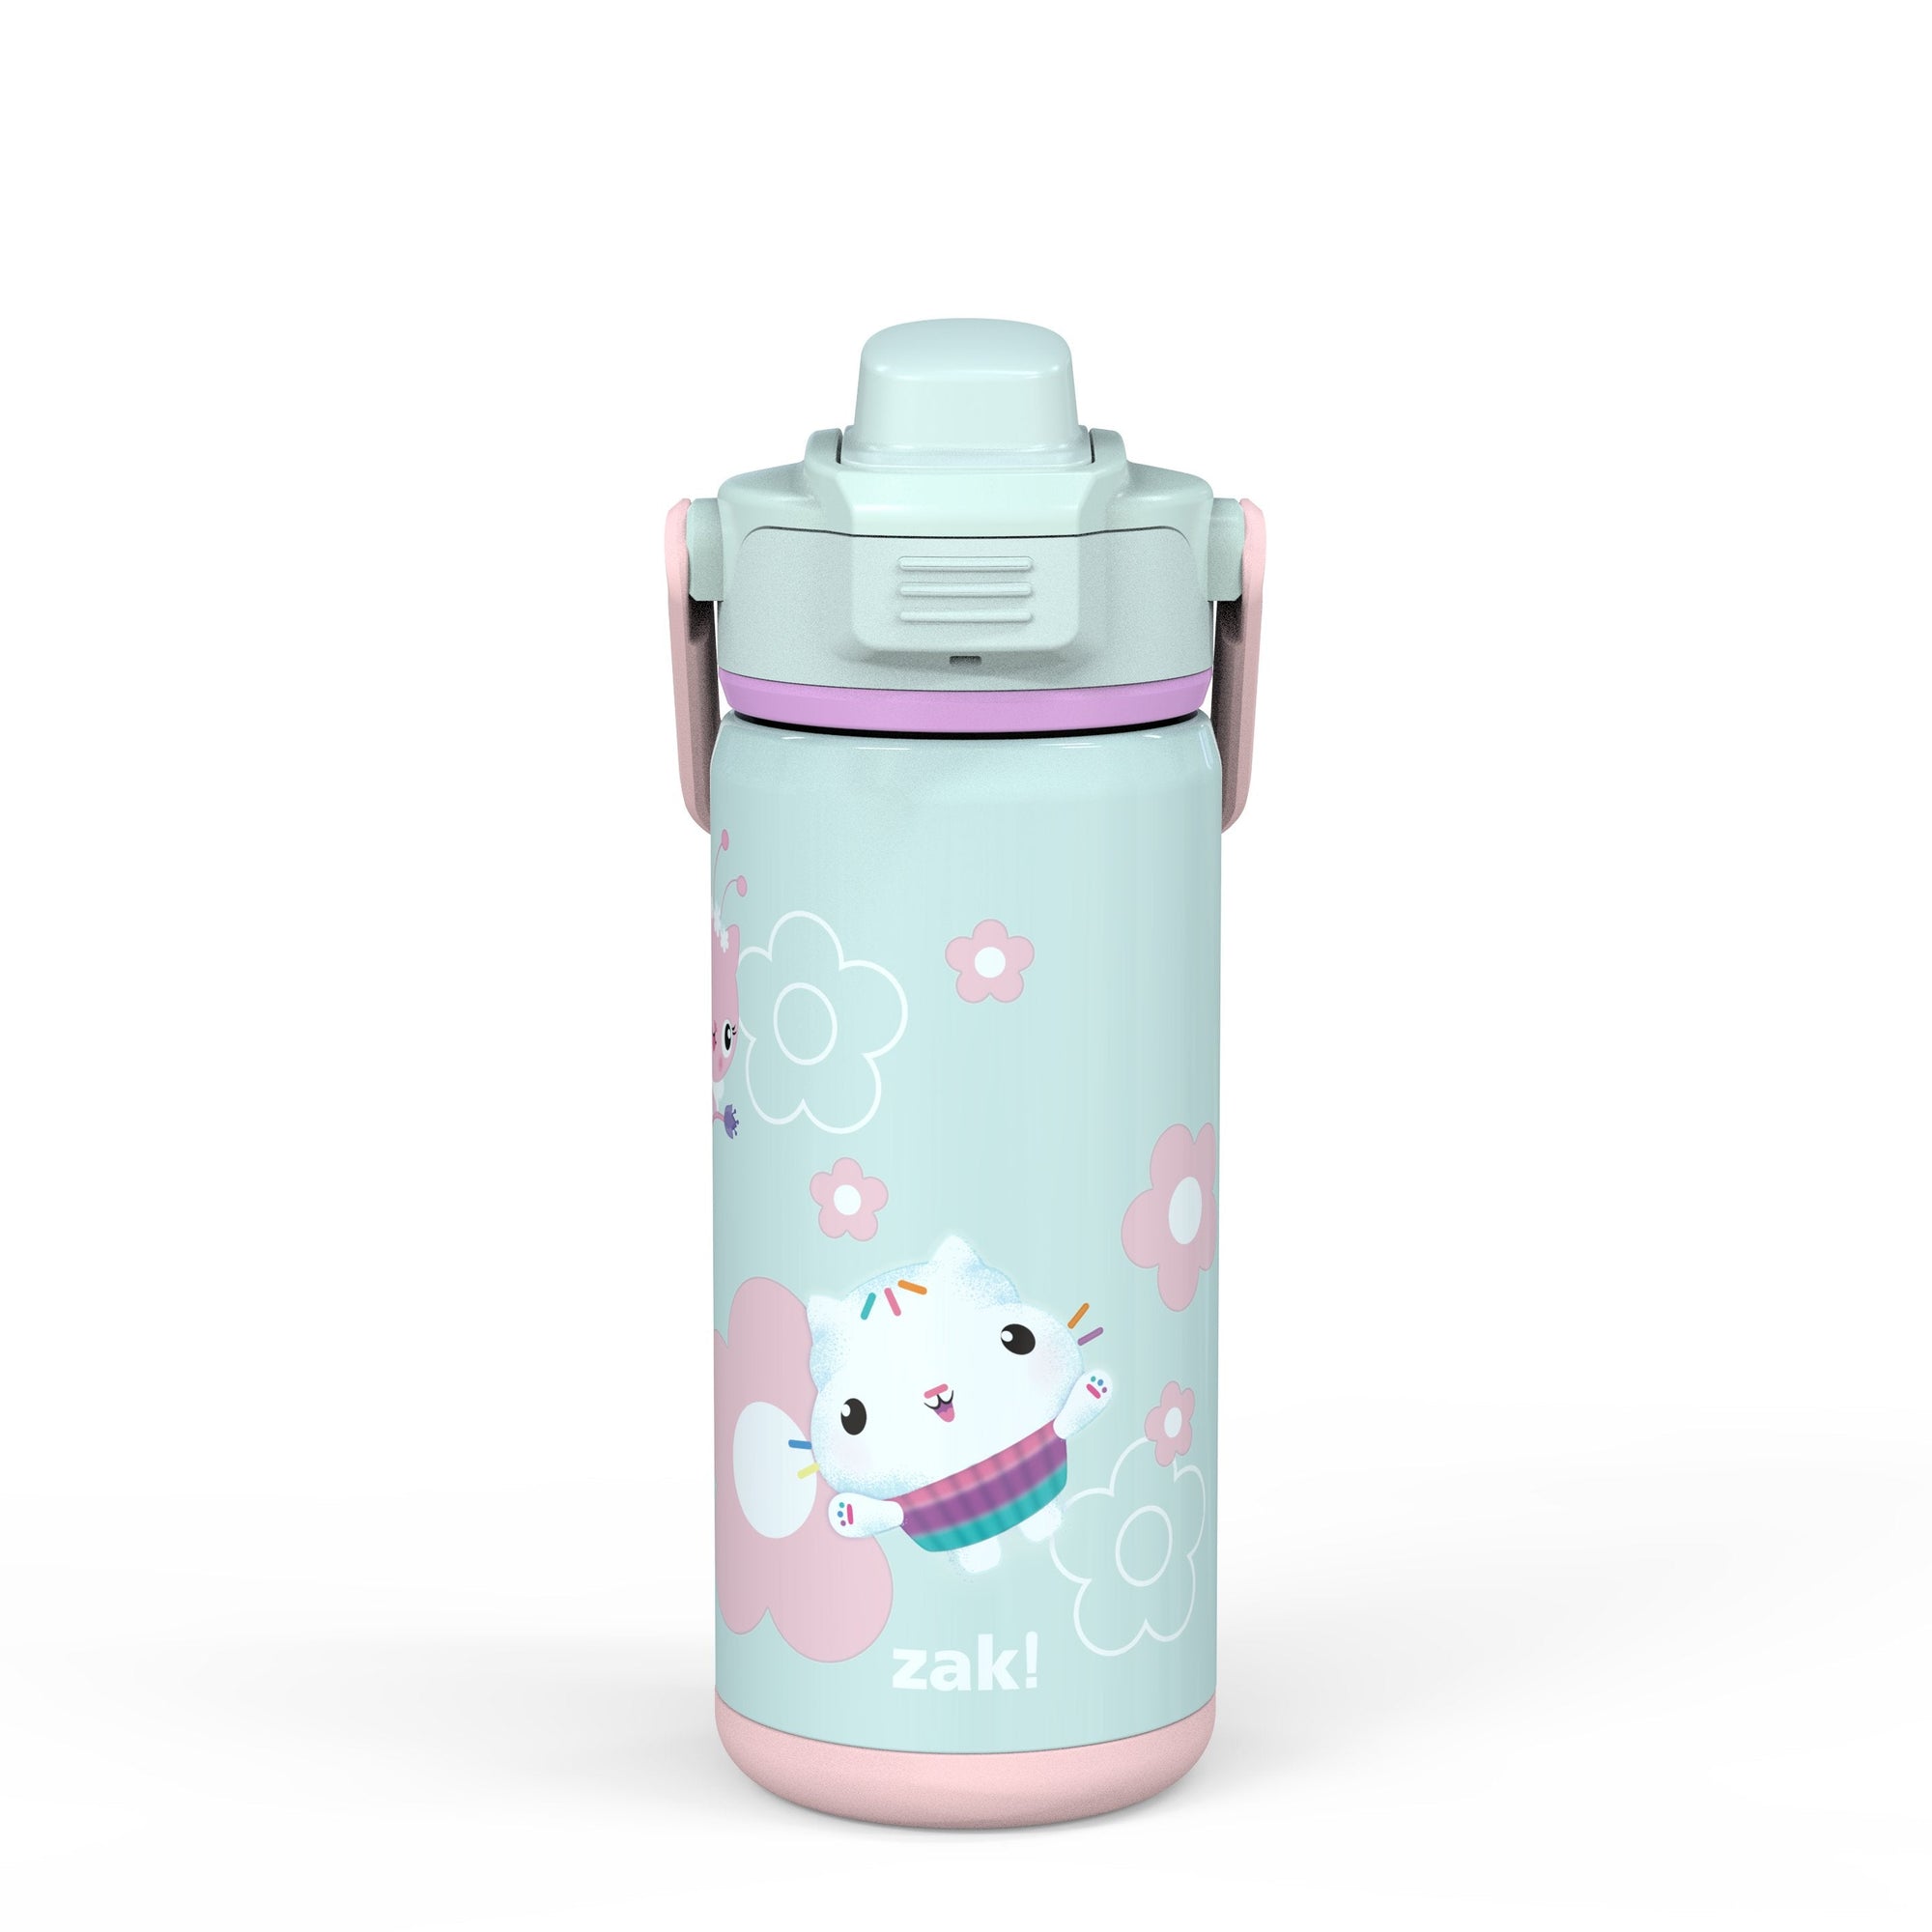 Gabby's Dollhouse Beacon Stainless Steel Insulated Kids Water Bottle with Covered Spout, 14 Ounces